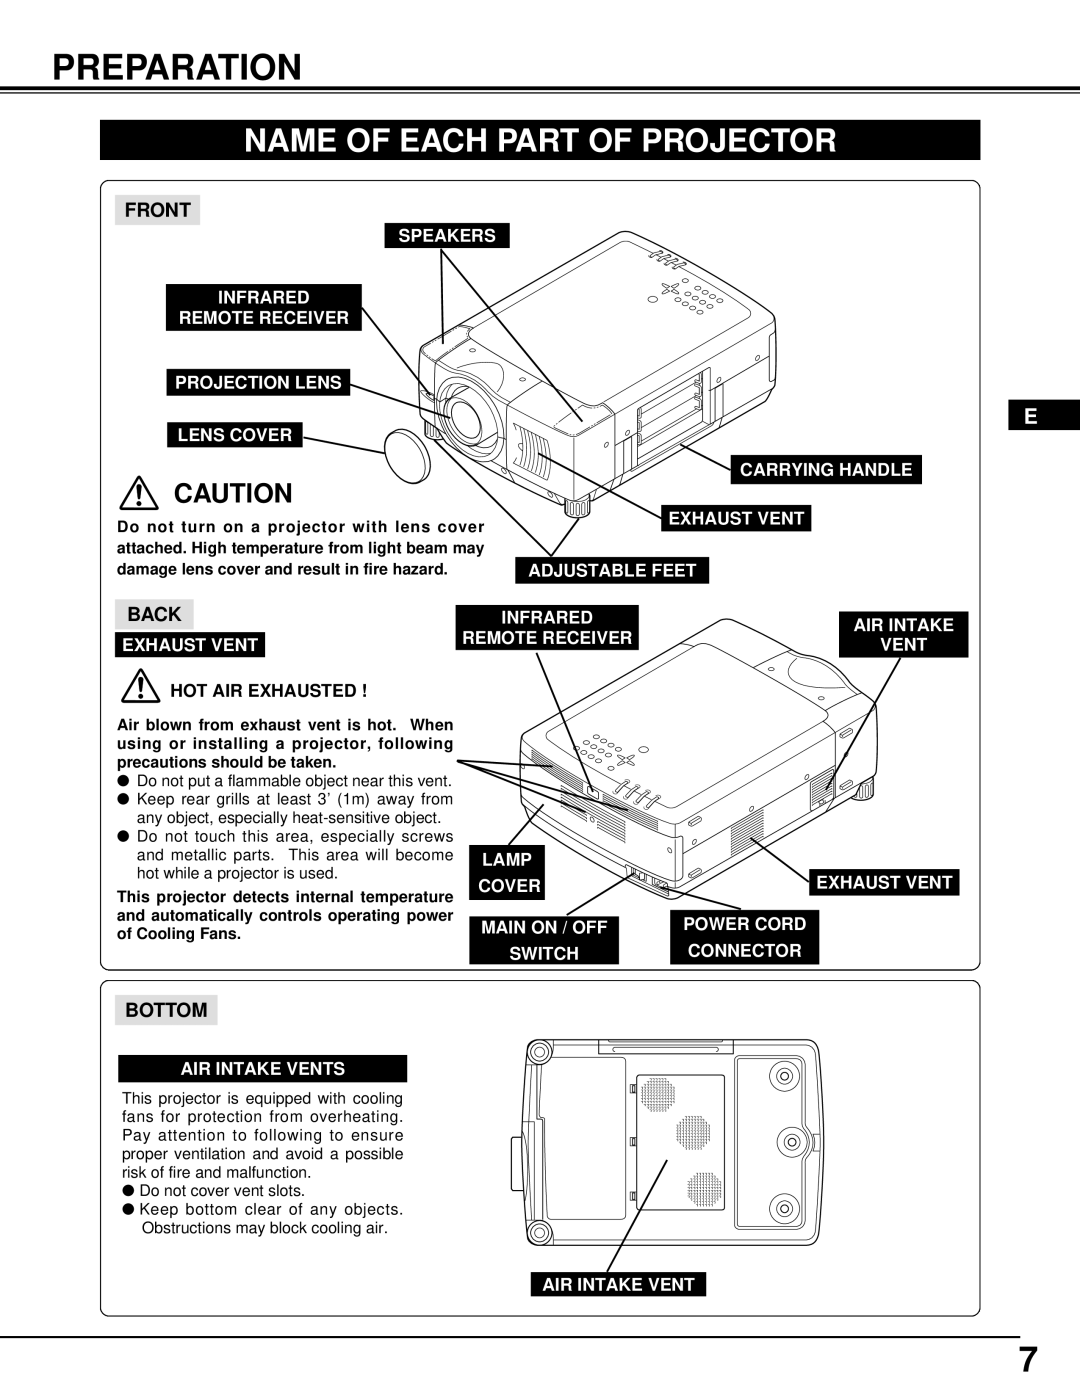 Dukane 28A8945, 28A9058 manual Preparation, Name Of Each Part Of Projector, Front, Bottom 